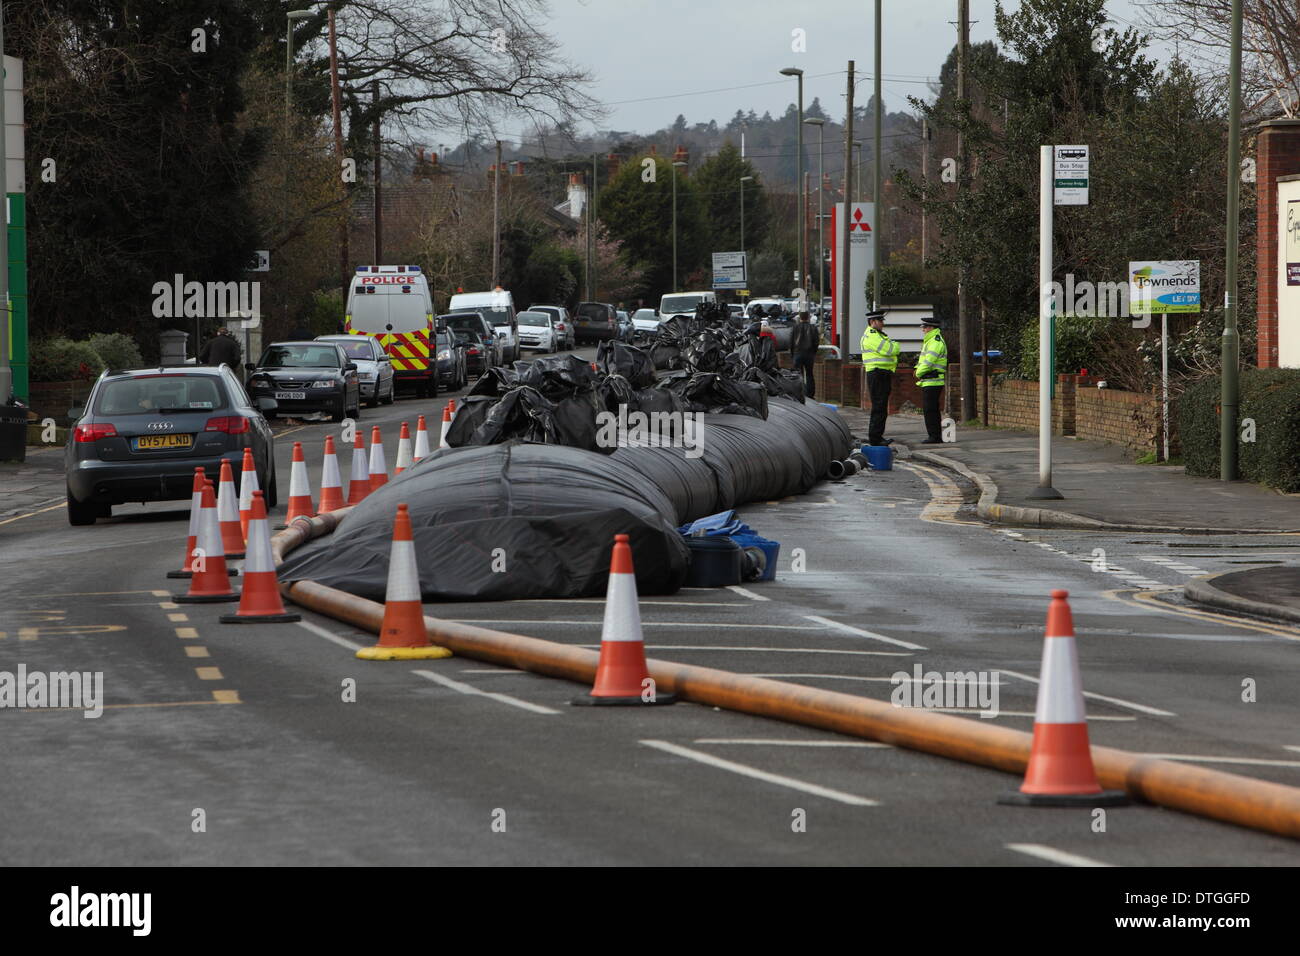 Cherysey Thames Valley, UK . 17th Feb, 2014. The aqua dam know as the 'Chertsey sausage' on Chertsey Bridge road. Flood waters remain high a week after flooding across the Thames valley. UK Credit:  Zute Lightfoot/Alamy Live News Stock Photo